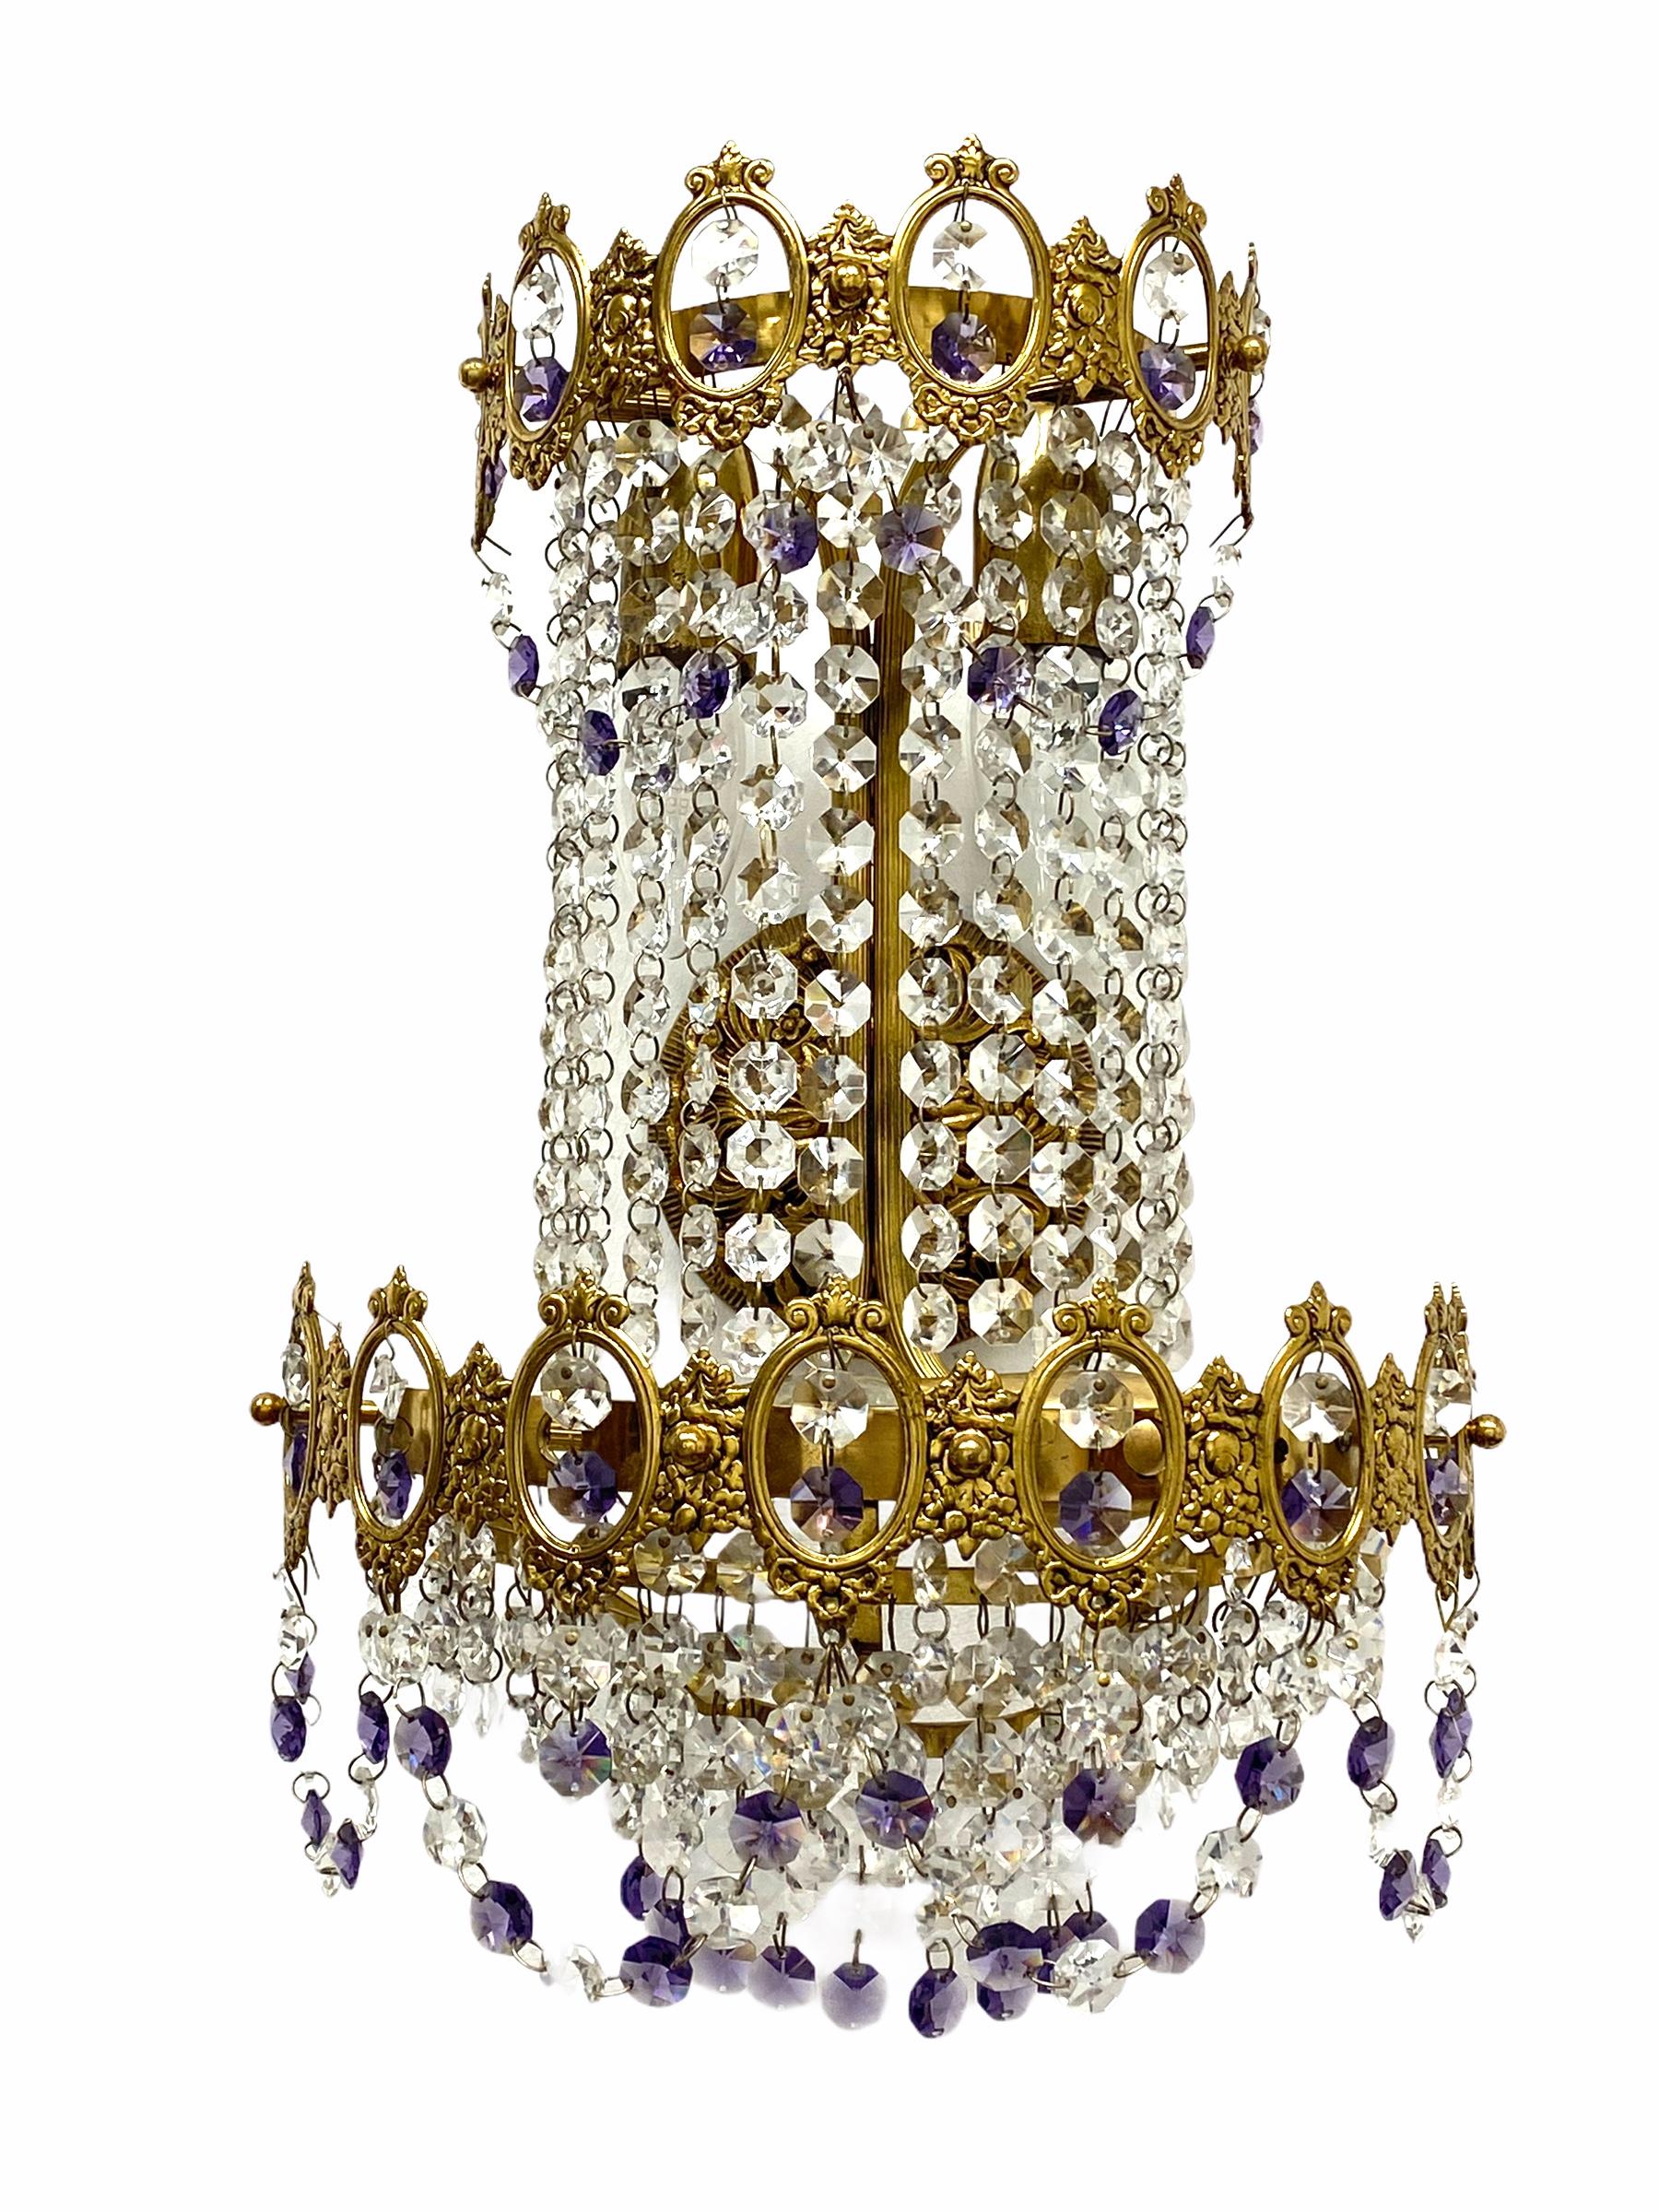 Austrian Pair of Monumental Empire Style Crystal and Bronze Sconces, Austria, 1930s For Sale